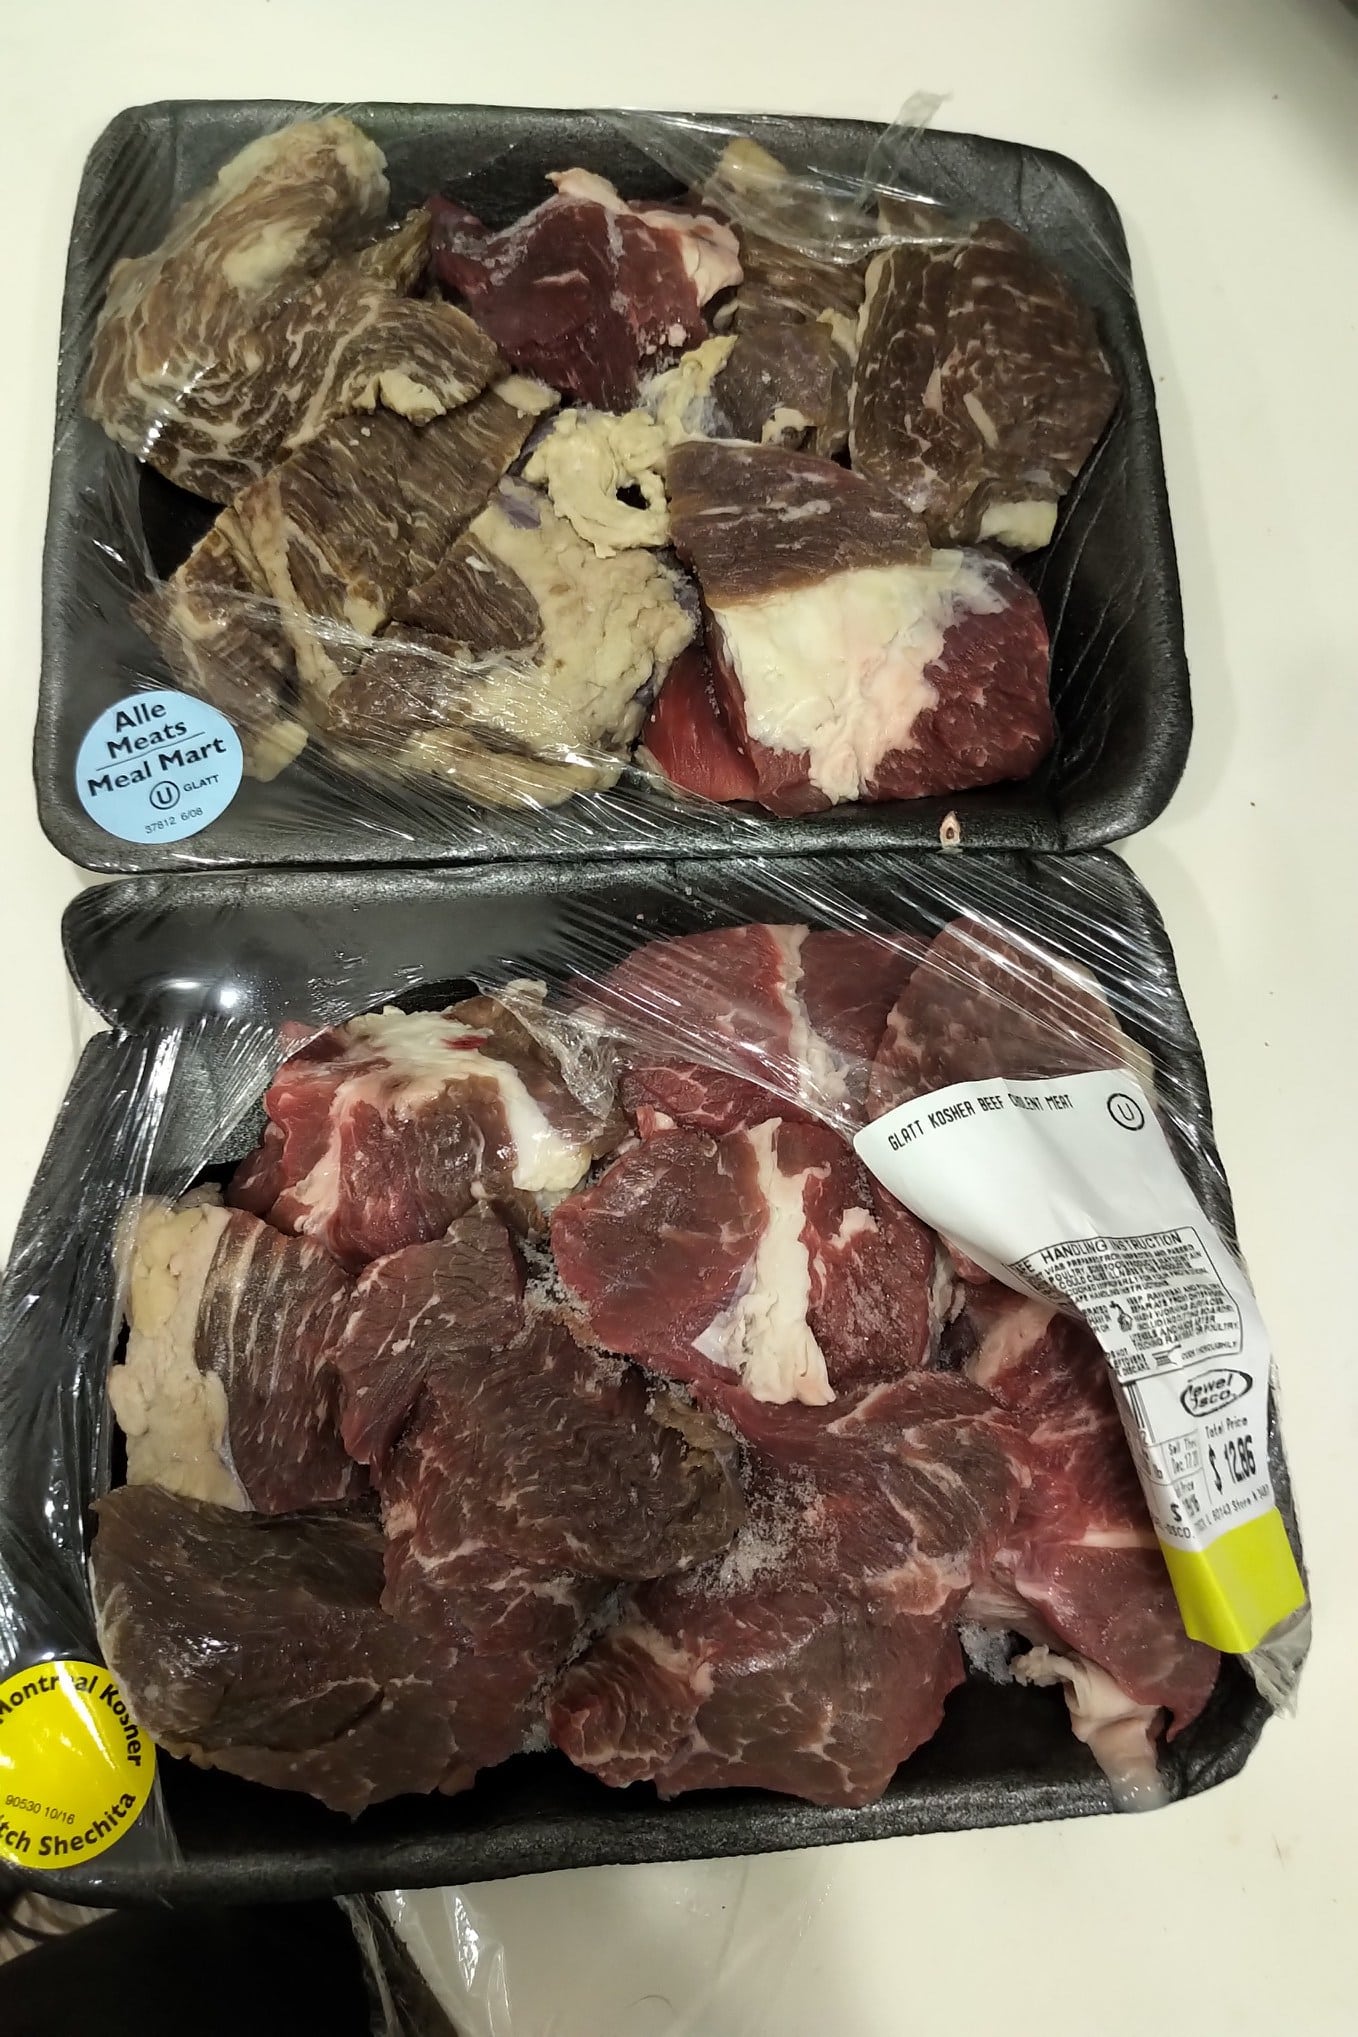 Mom at the Meat Counter: Don't judge cooked meat by its color.